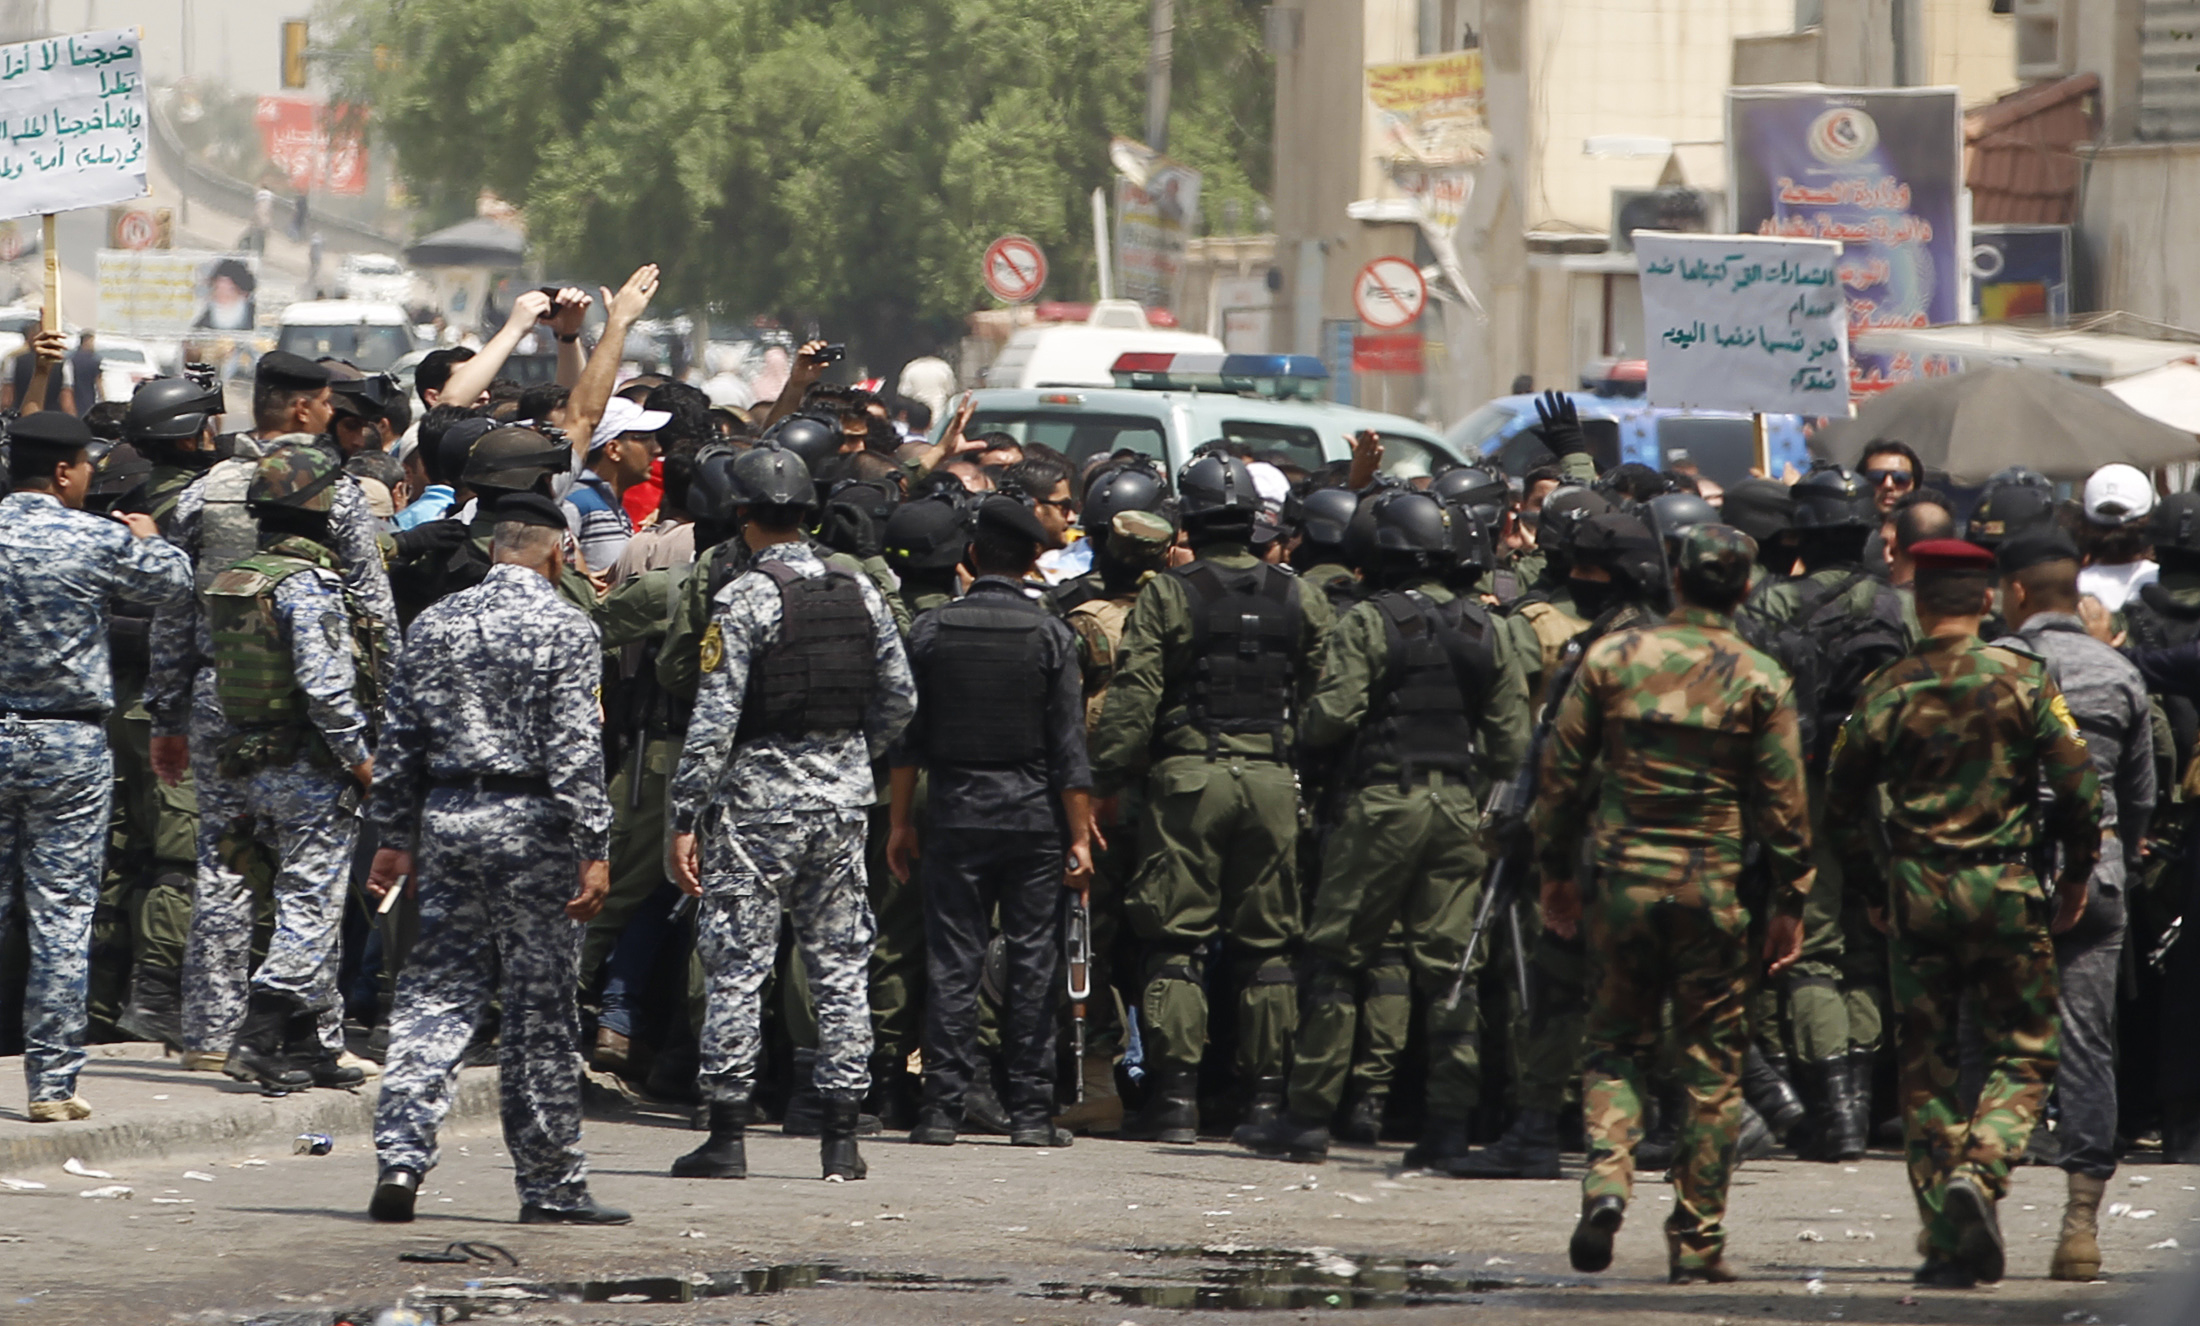 Members of the Iraqi security forces prevent protesters from passing through a cordoned road which leads to Al-Tahrir Square during the demonstration in Baghdad